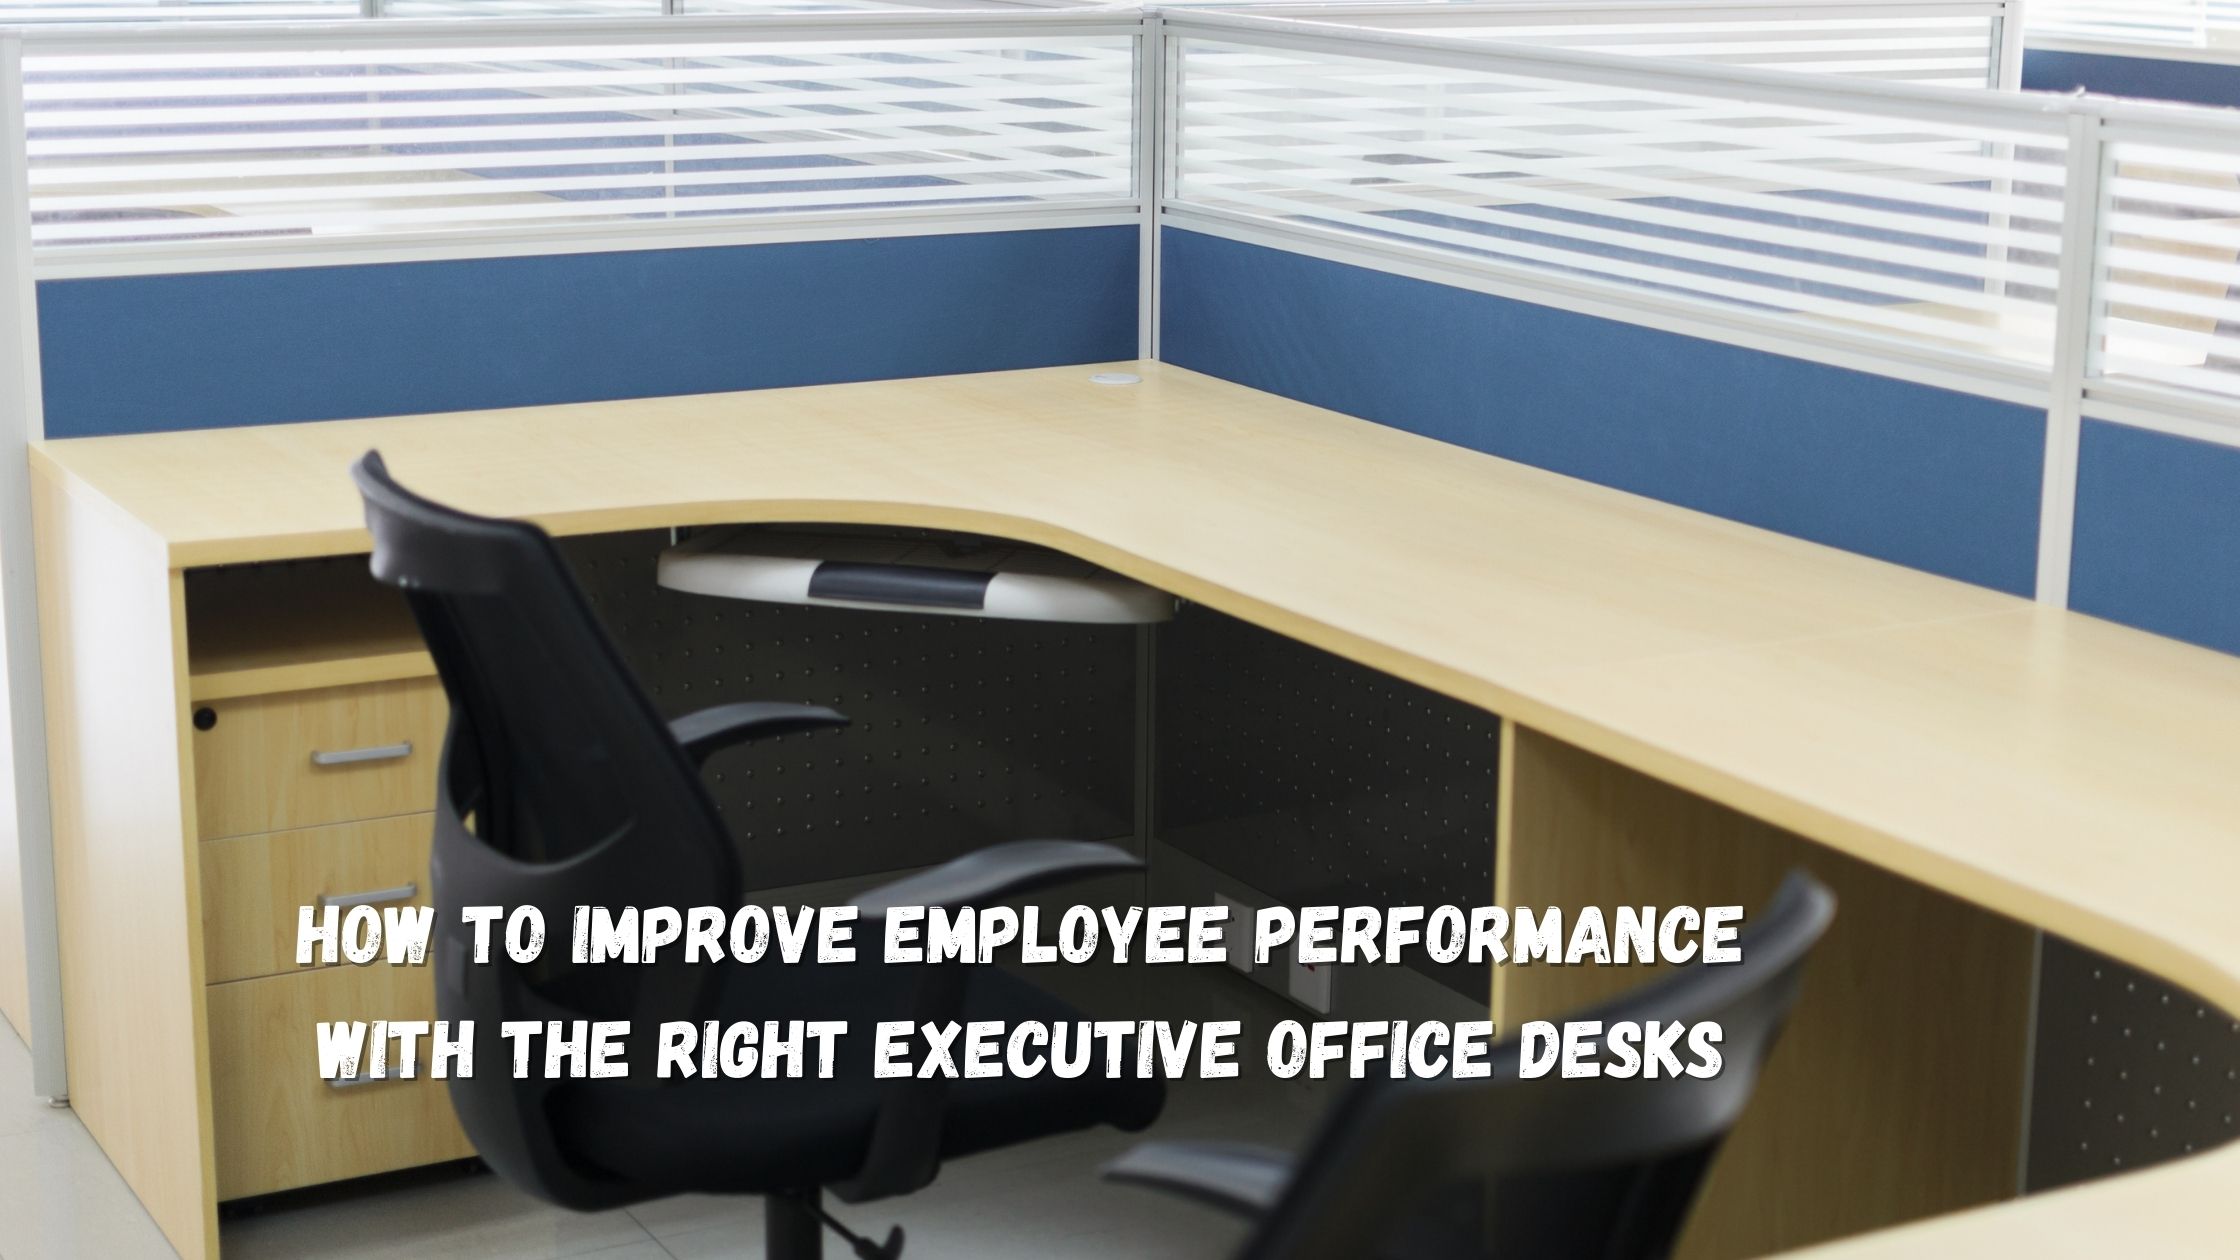 How to improve employee performance with the right executive office desks